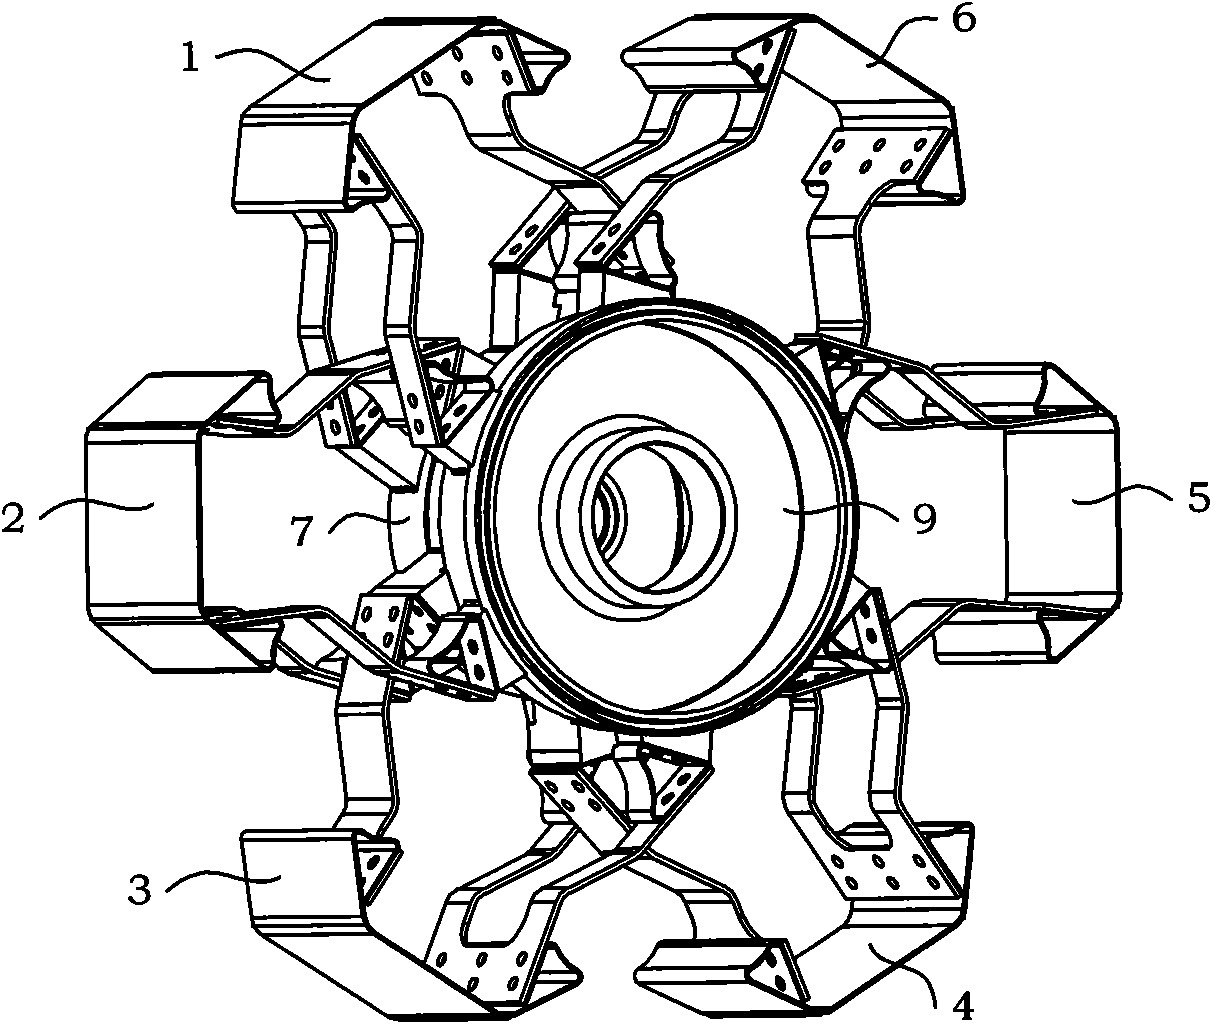 Multifunctional vehicle with variable diameter wheels and skids